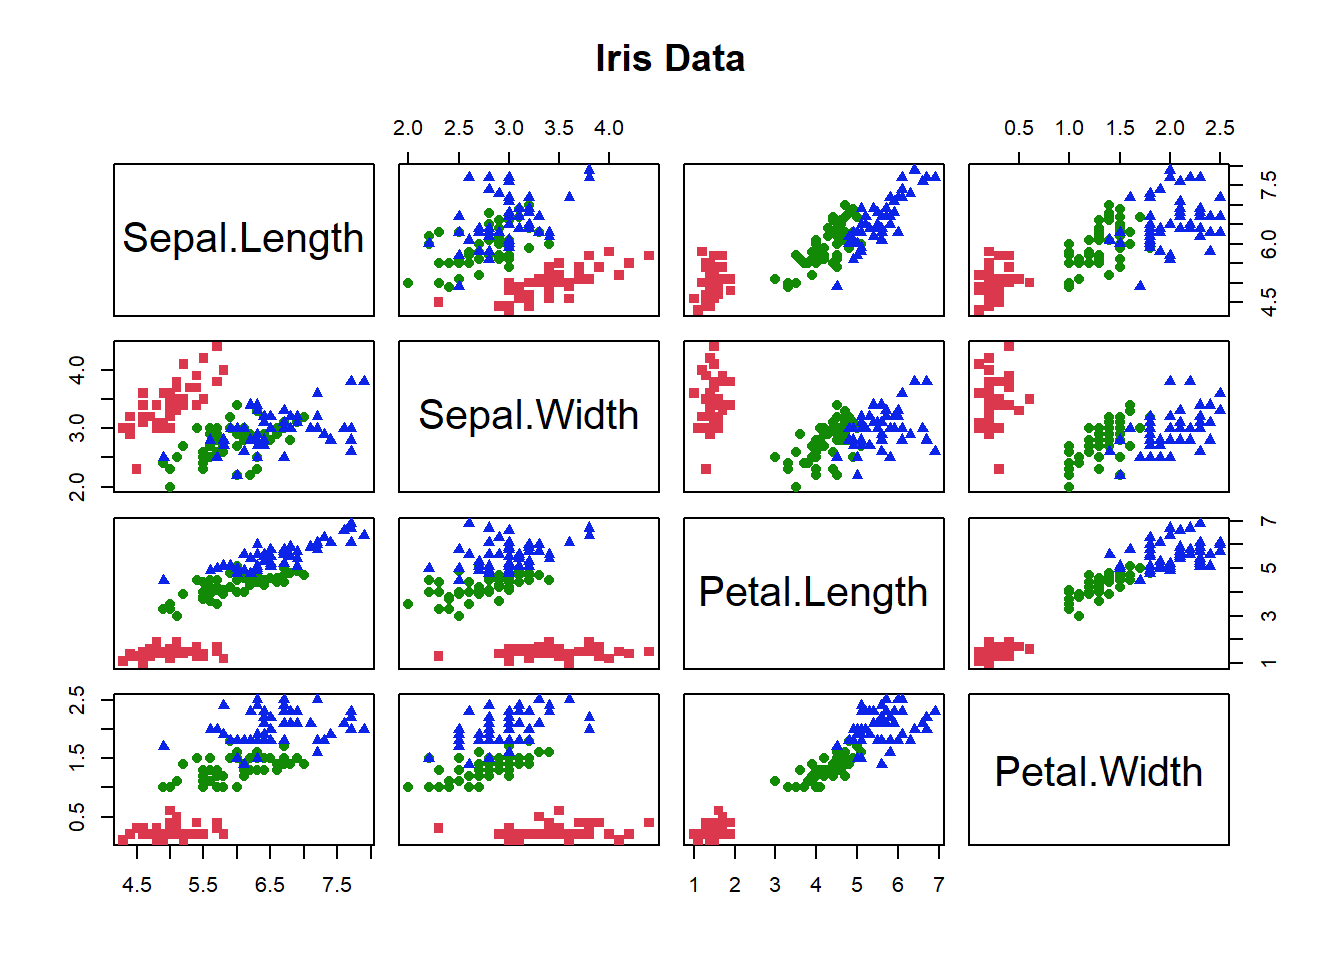 A total of twelve pairwise correlation plots for the four characteristics in iris dataset: sepal length, sepal width, petal length, and petal width. In each plot, one of the four characterstics is selected as x-axis and y-axis with data points based on species.